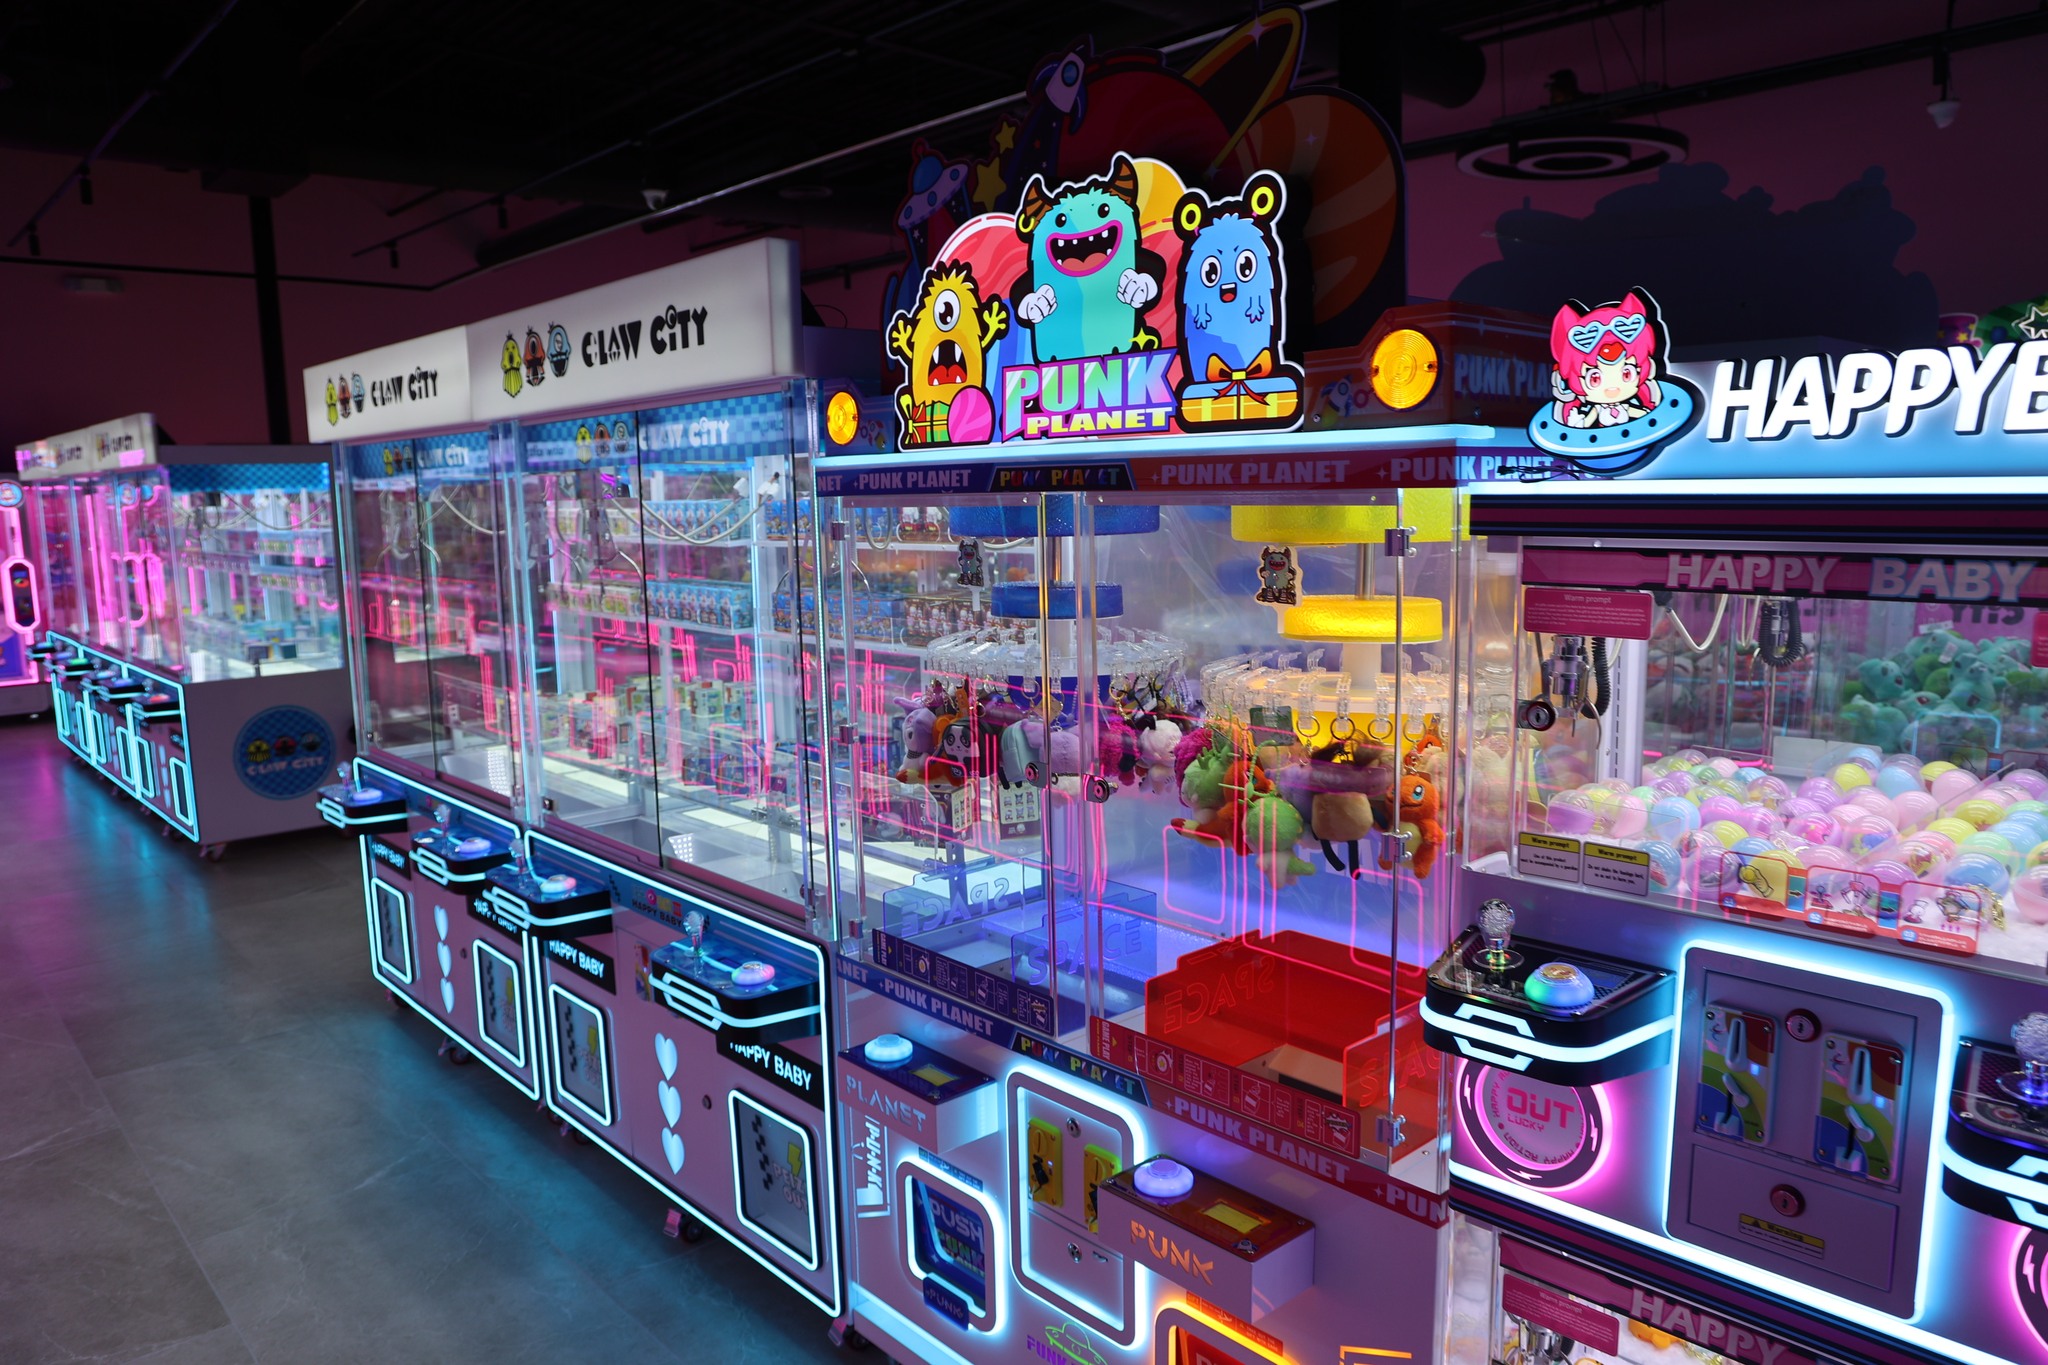 Claw Machines and Prizes Galore: Claw City Opens in Katy Asian Town